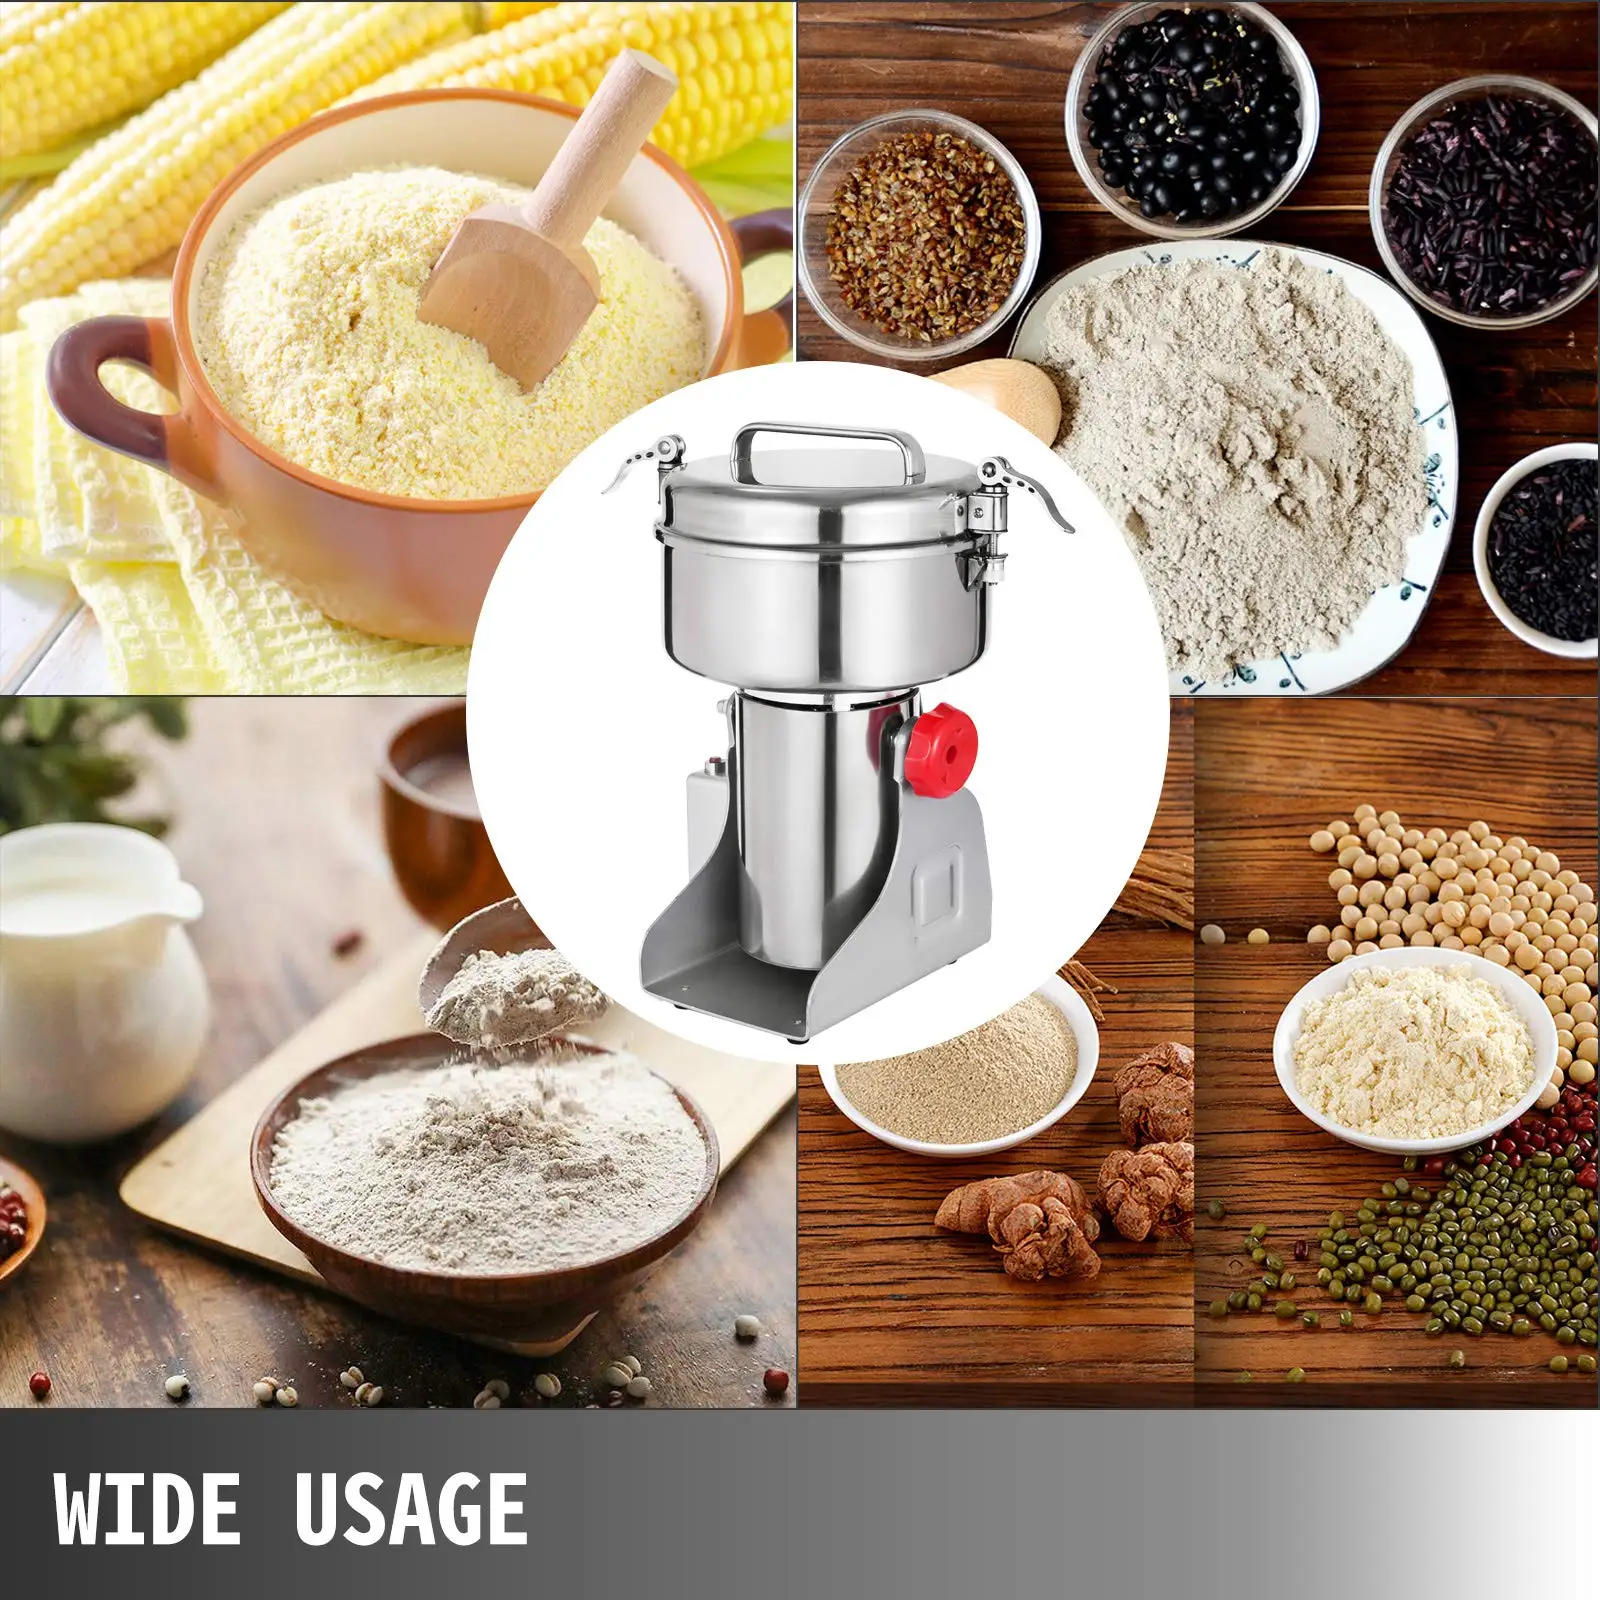 https://ae01.alicdn.com/kf/S38bf78d364e34d969aa810eb8c456276e/VEVOR-Electric-Grain-Grinder-1000G-Stainless-Steel-Grinding-Machine-for-Crushing-Wheat-Herb-Soybeans-Millet-Corn.jpg